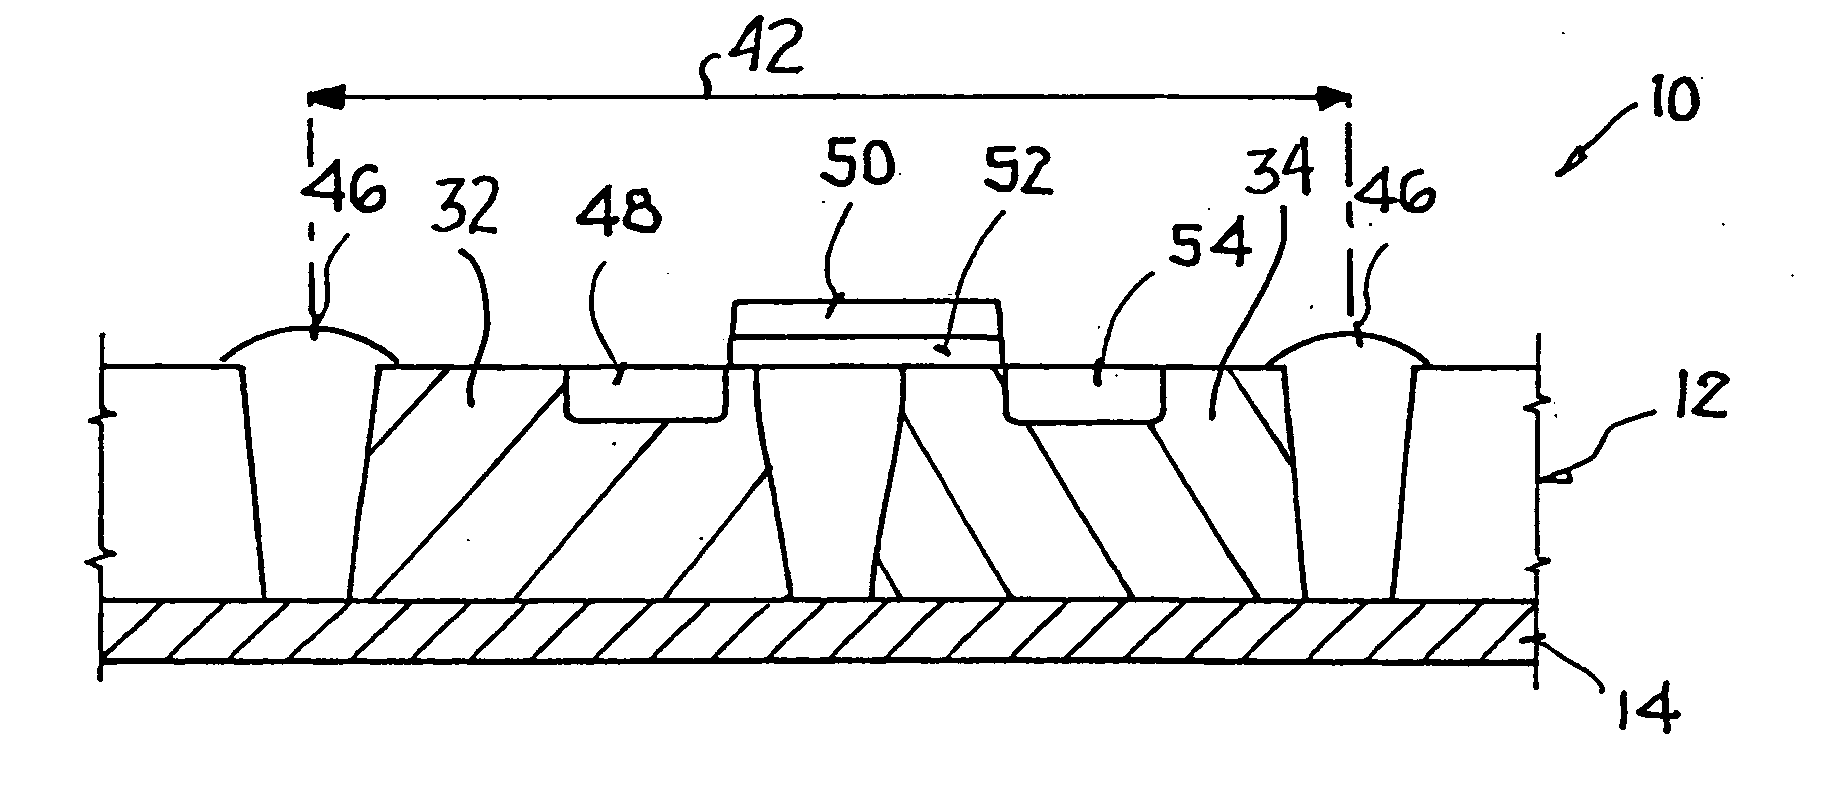 Method of fabricating semiconductor components through implantation and diffusion in a semiconductor substrate